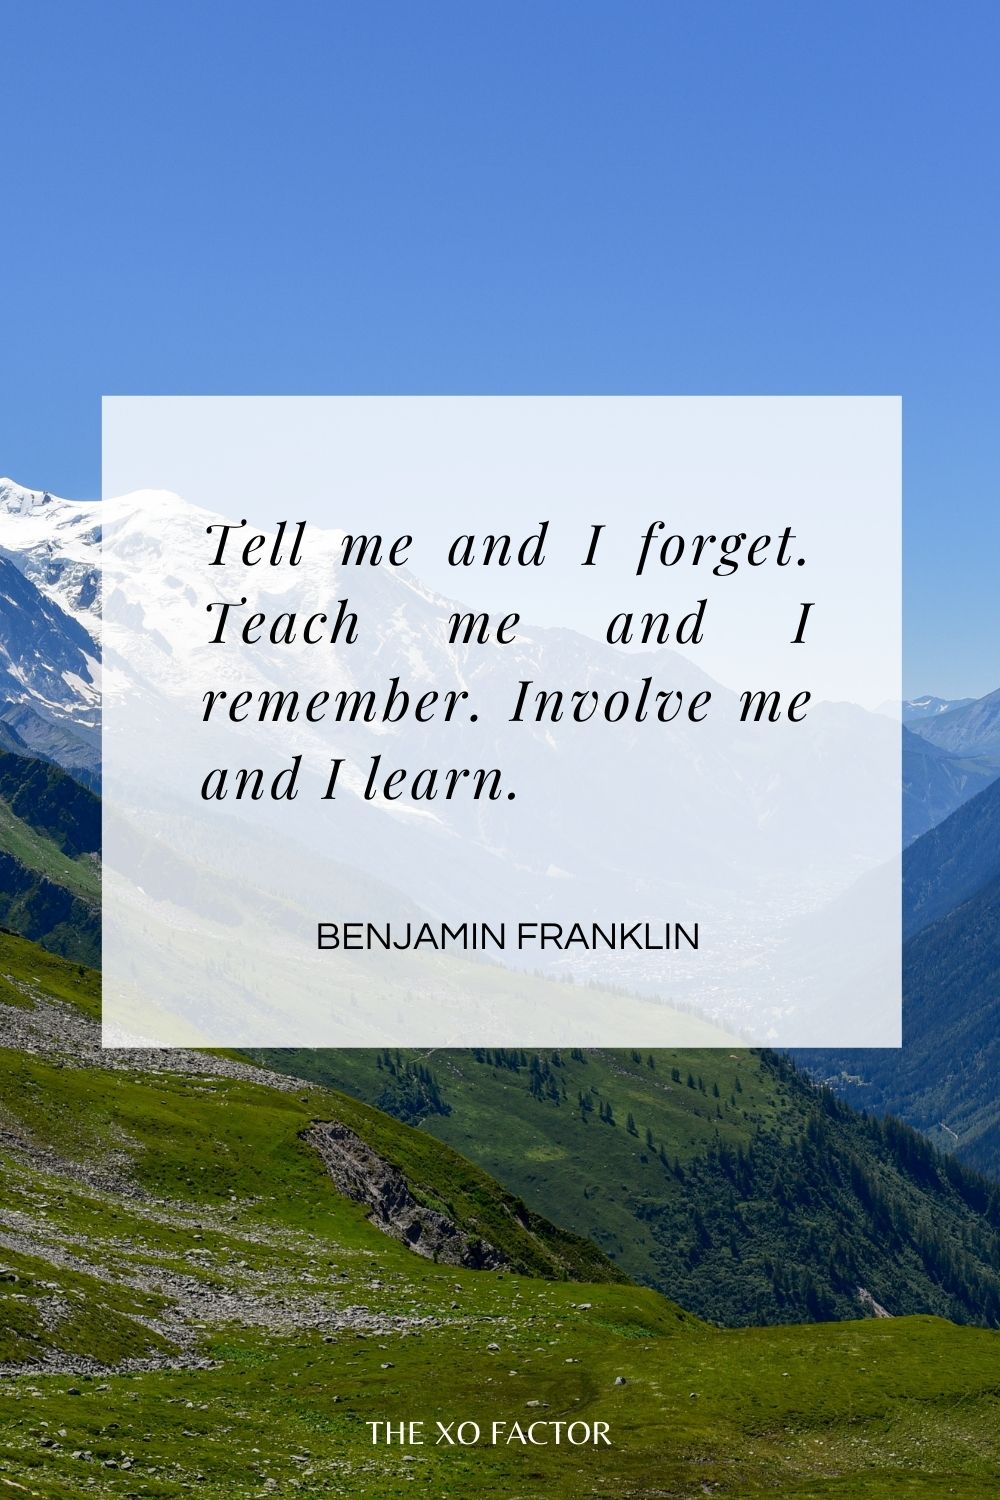 Tell me and I forget. Teach me and I remember. Involve me and I learn.  Benjamin Franklin